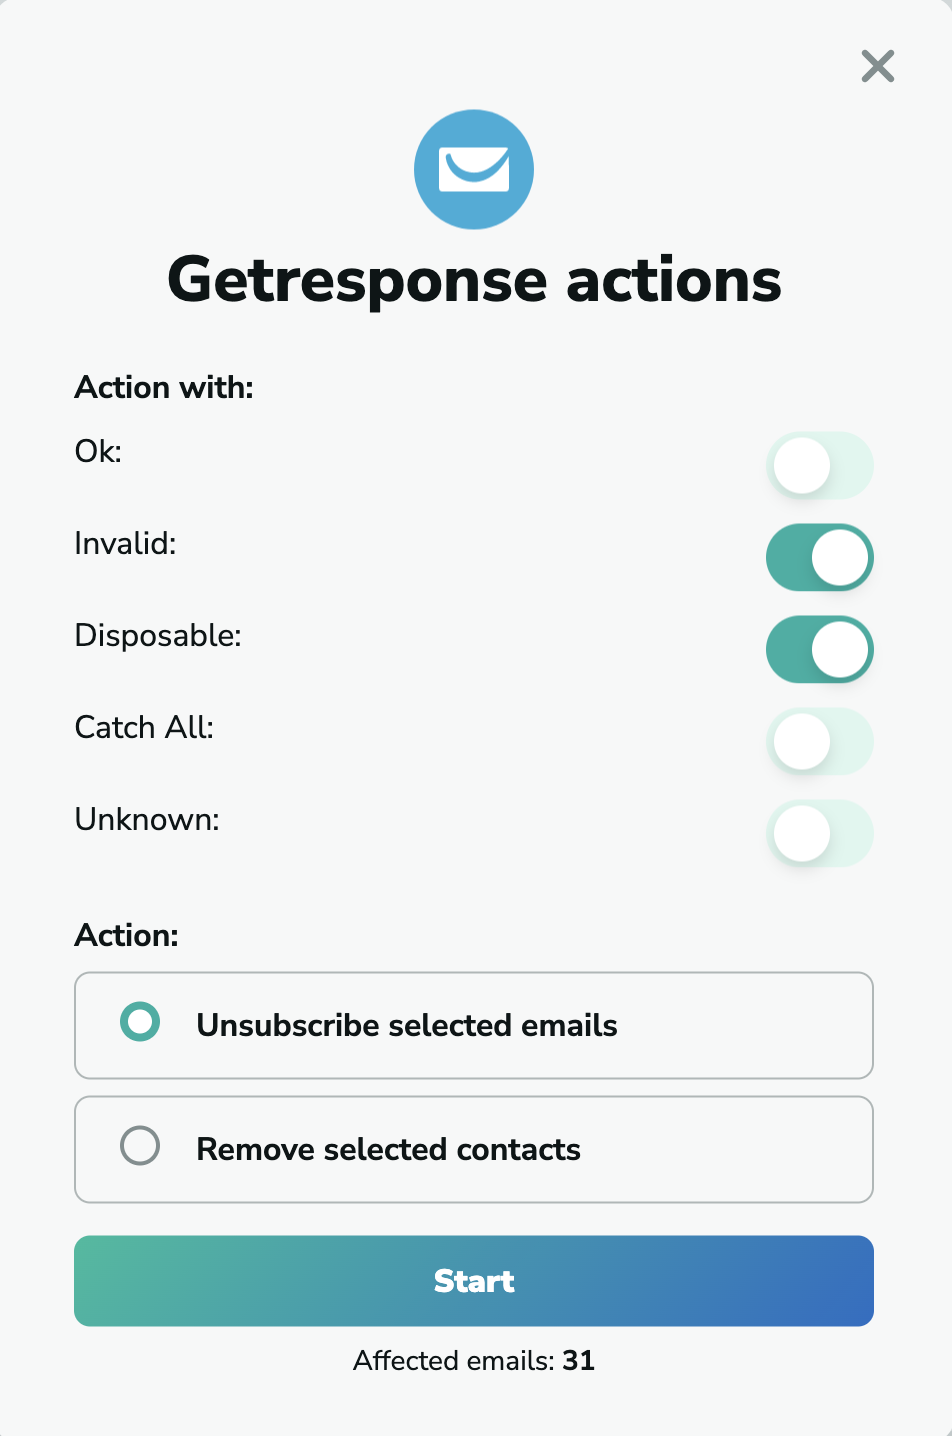 Getresponse unsubscribe emails in MillionVerifier